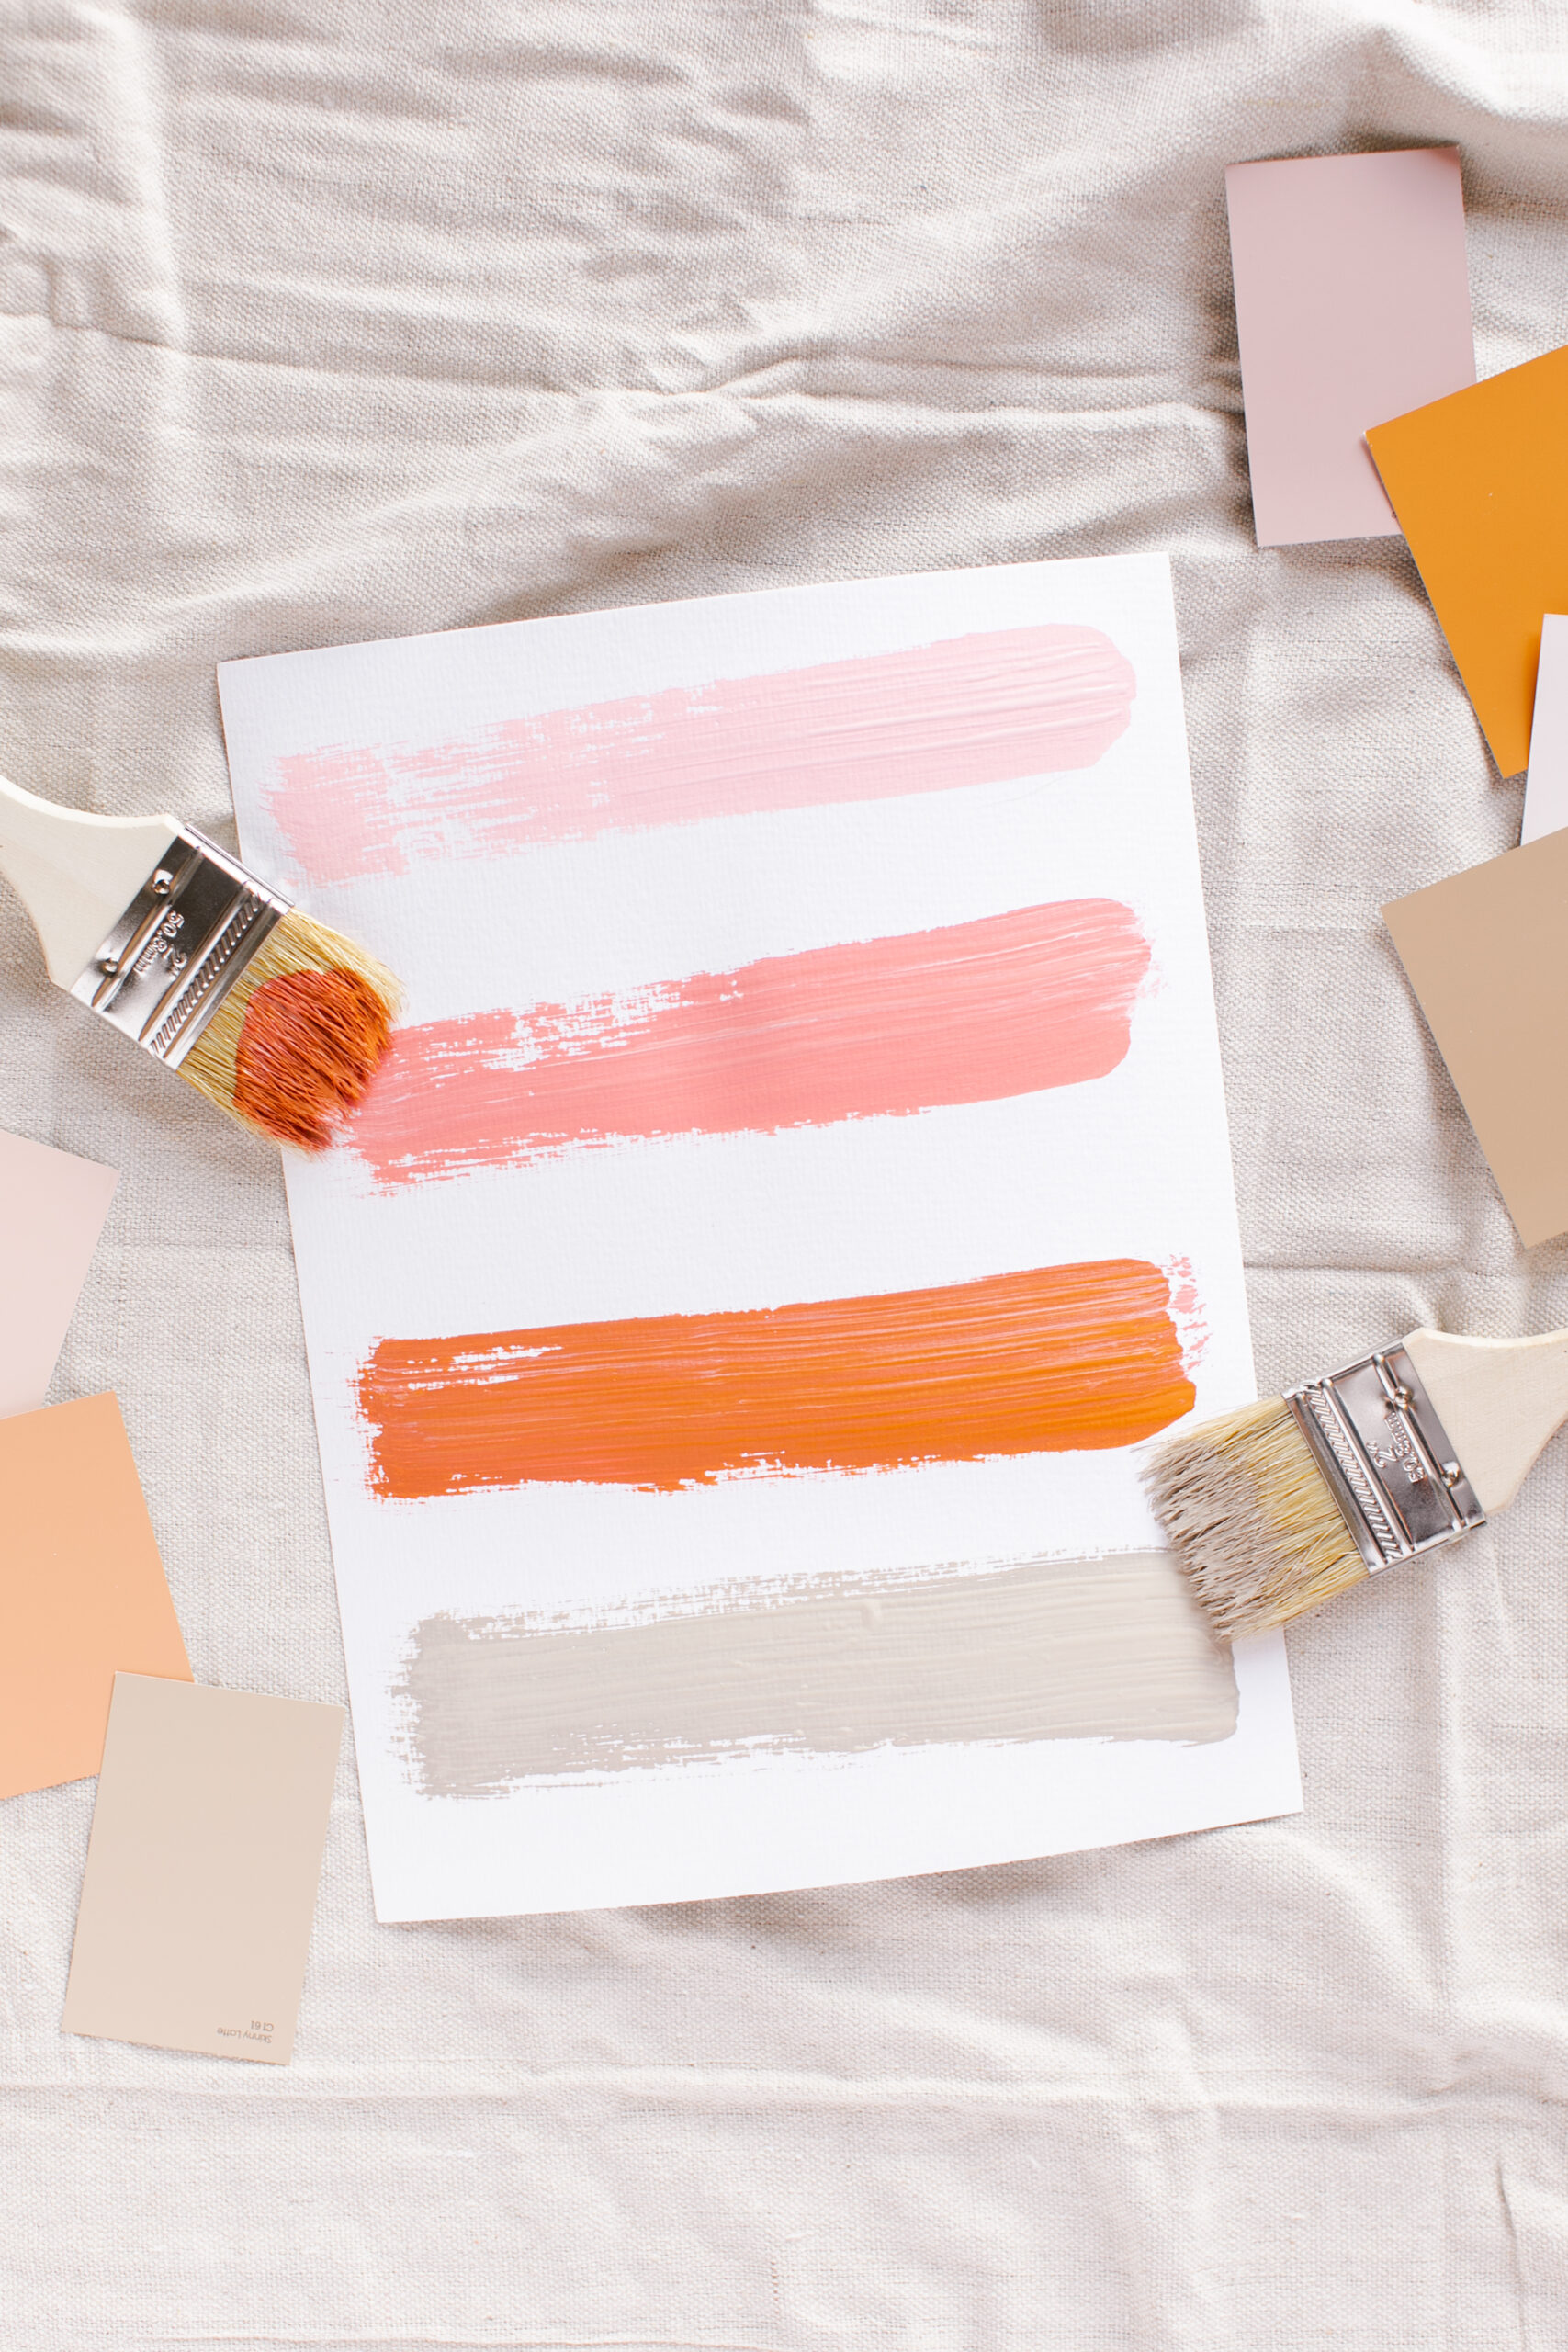 paint brushes with five stripes of multicolored paint on a sheet of paper